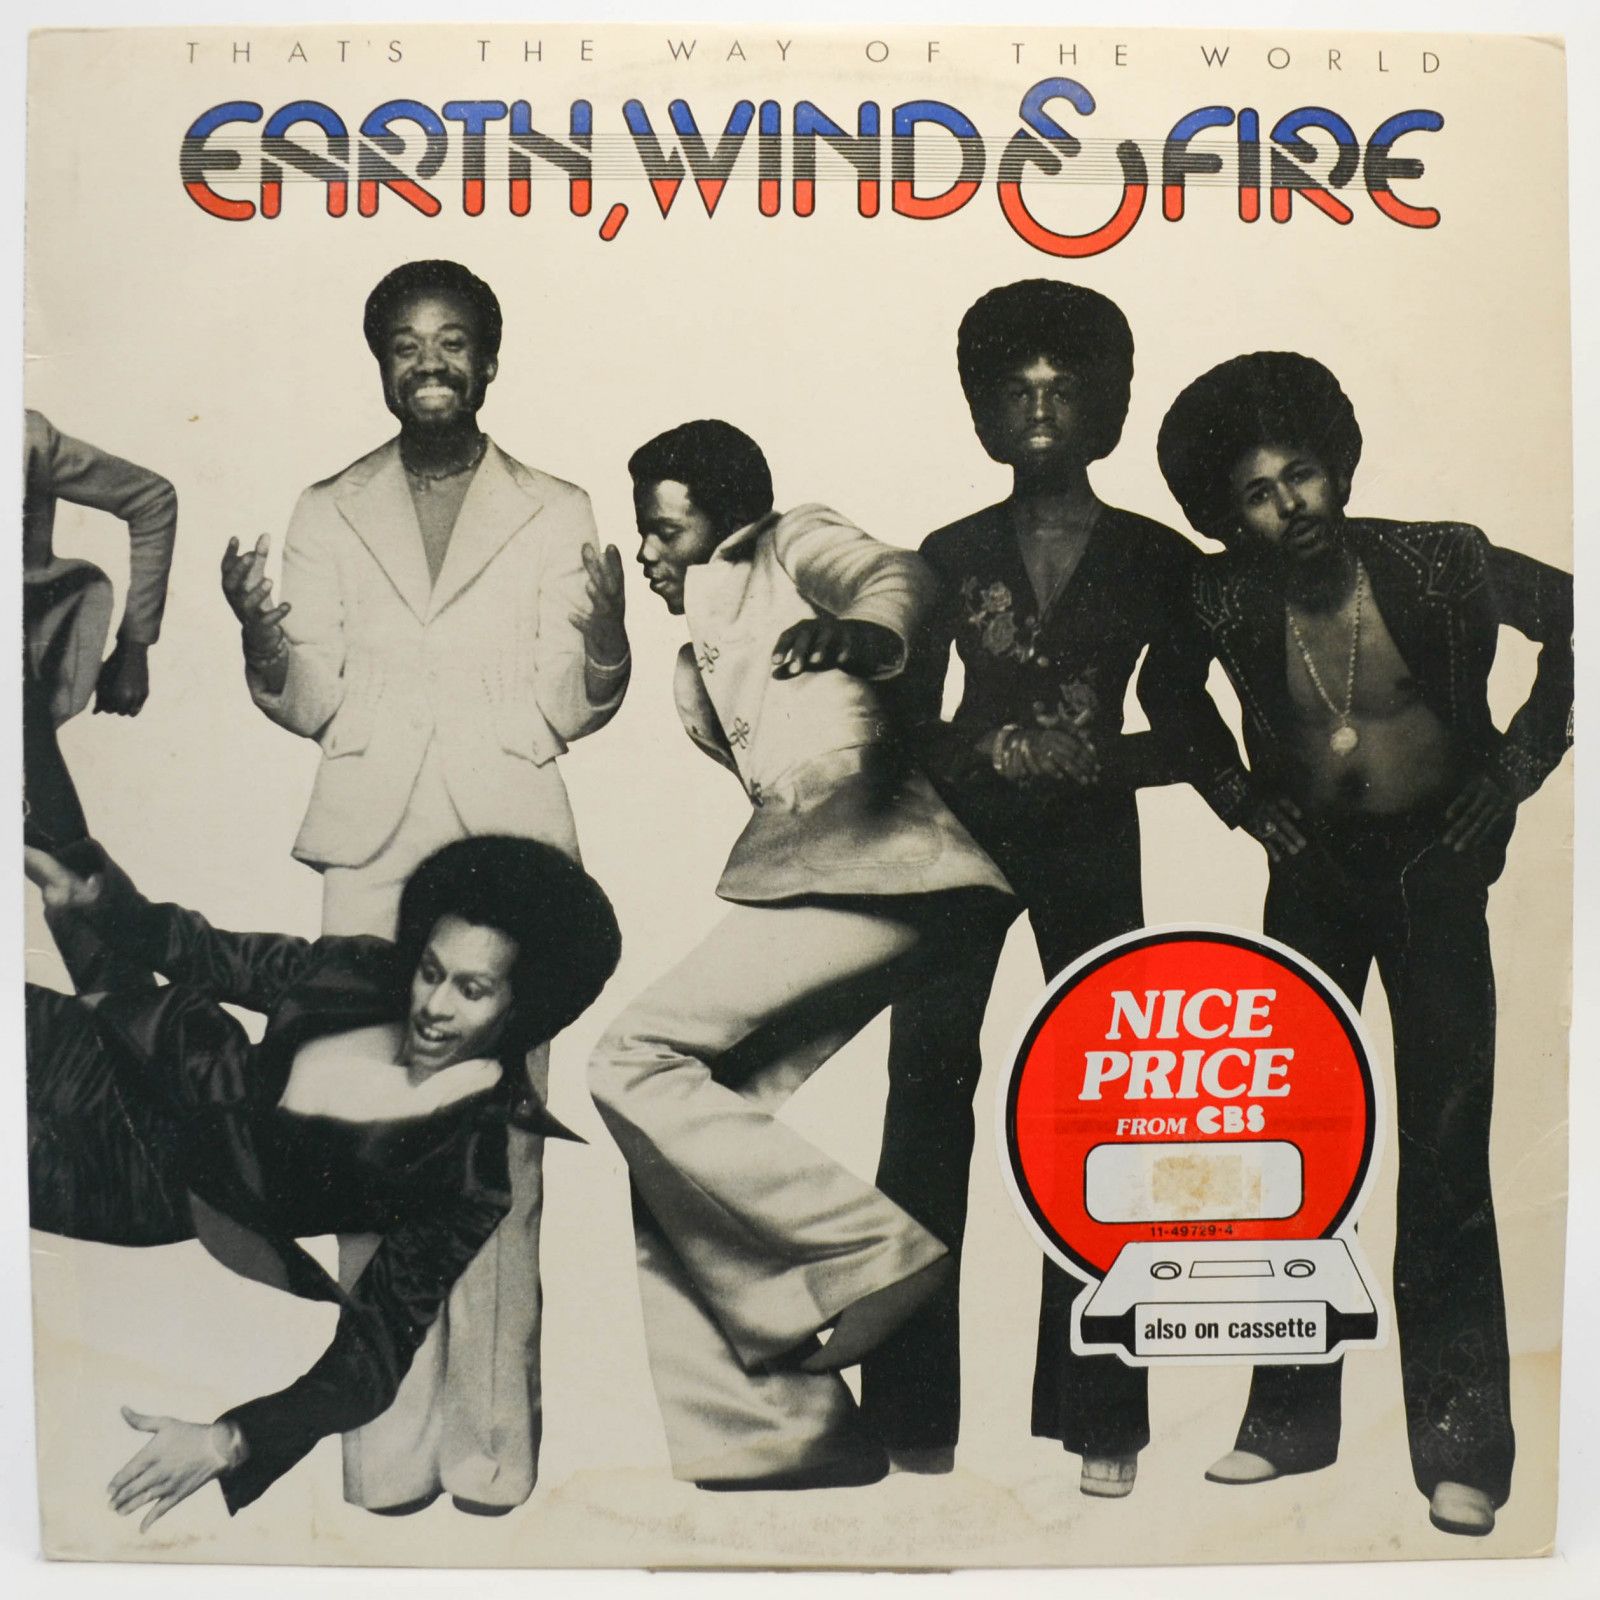 Earth, Wind & Fire — That's The Way Of The World, 1975